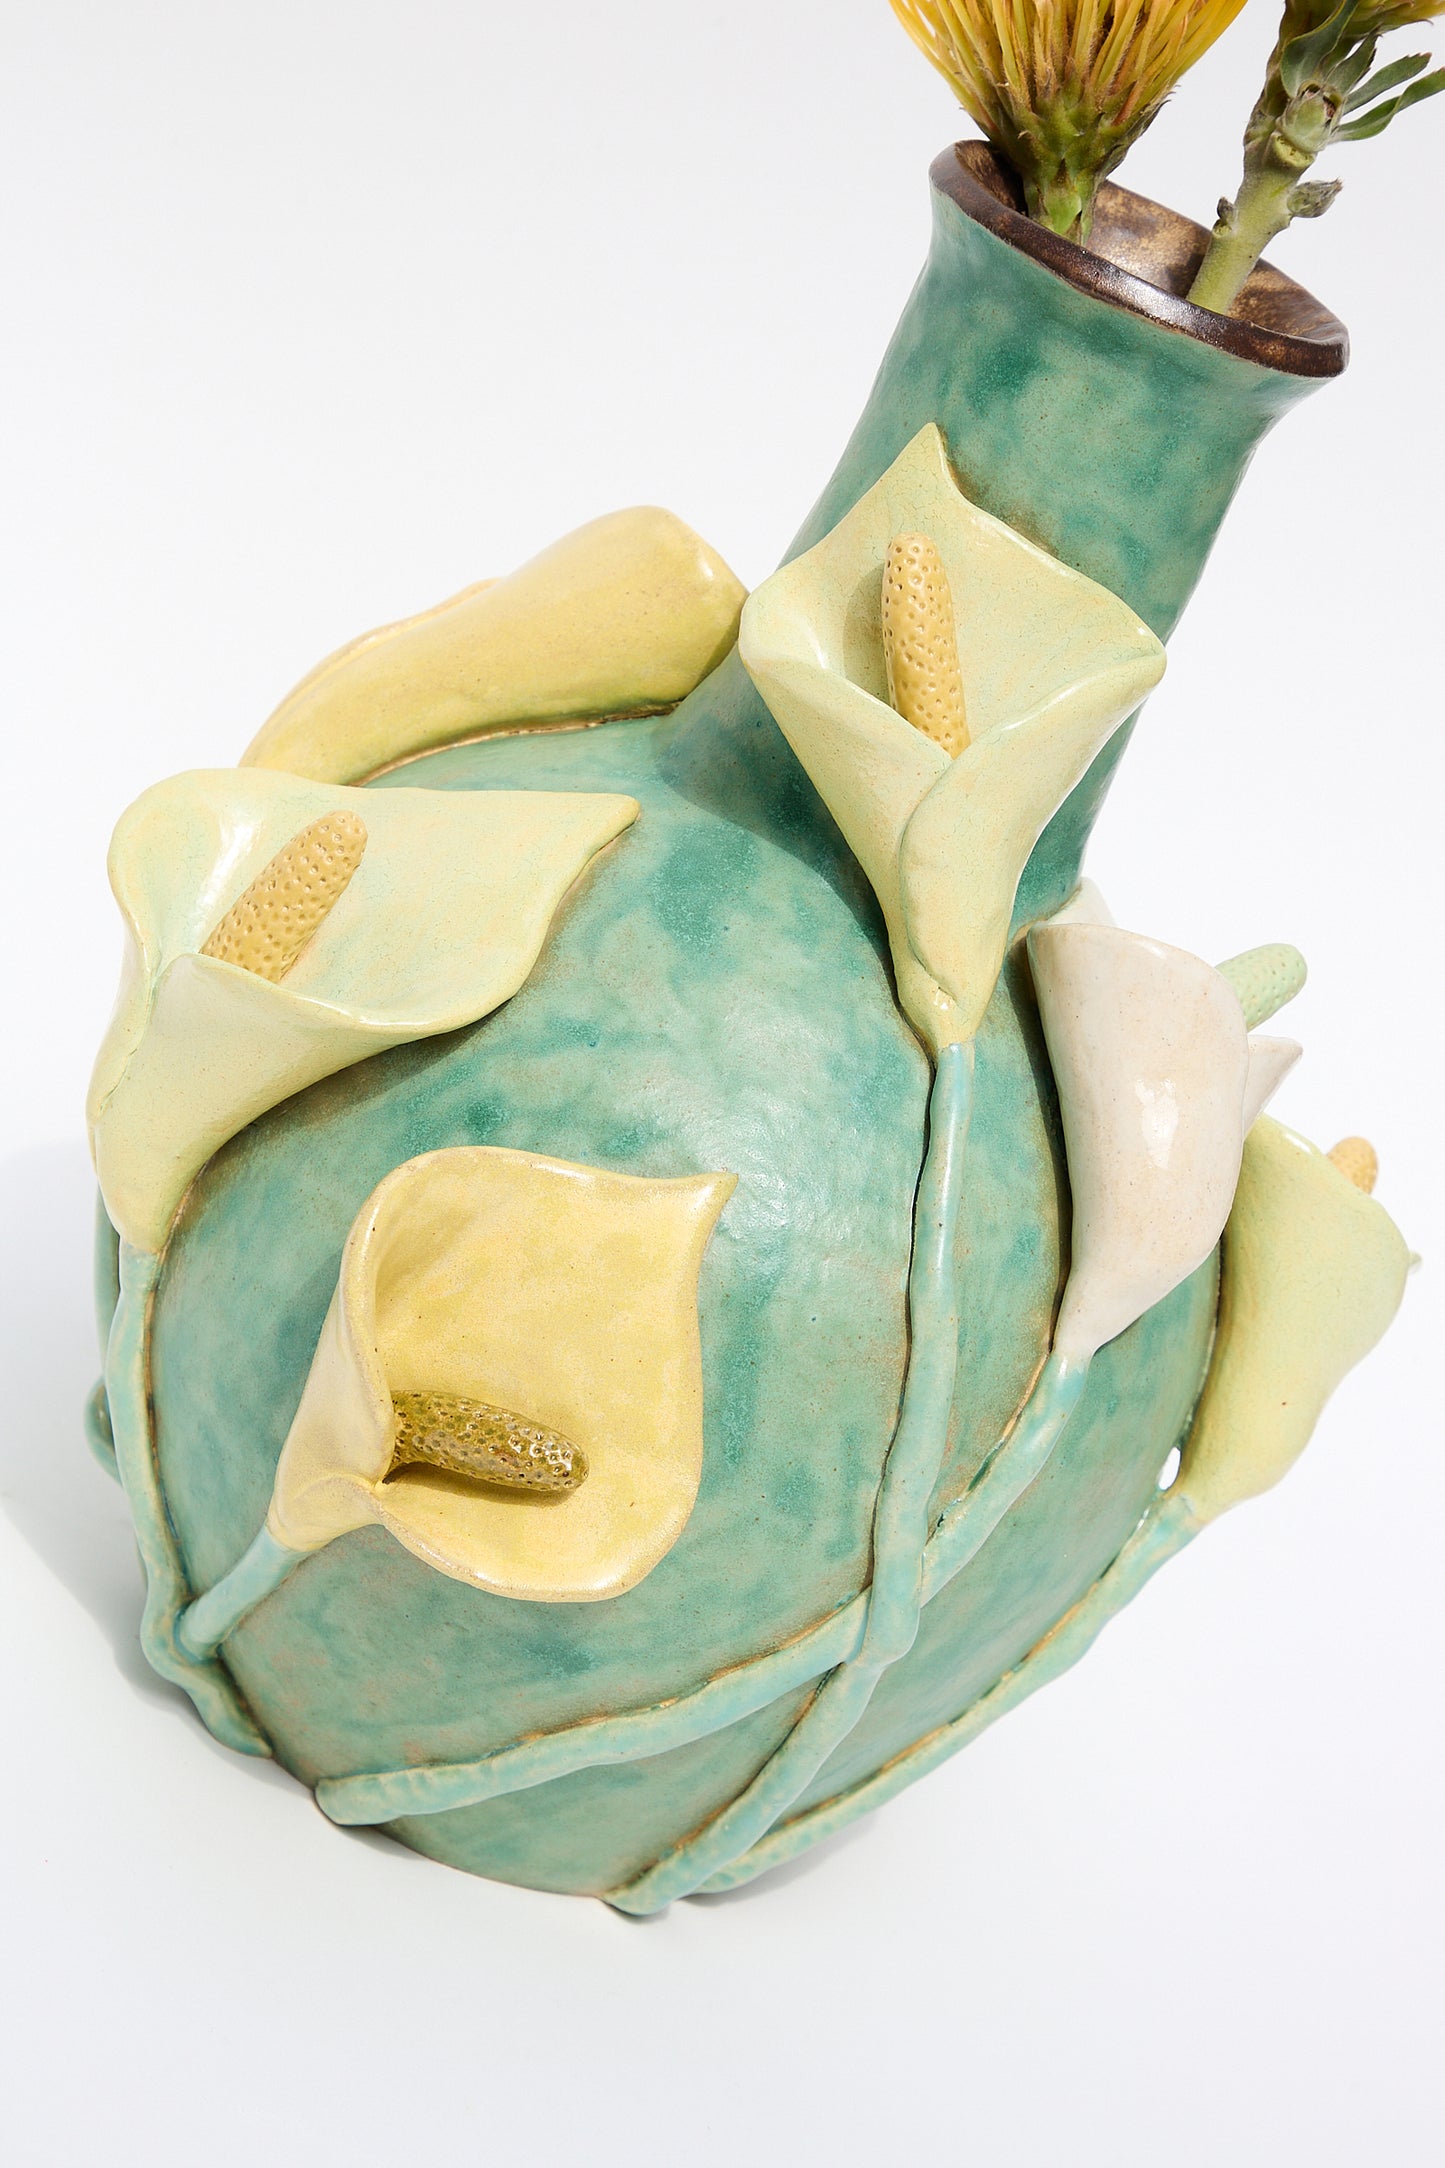 Sentence with replaced product:
A glazed stoneware Pearce Williams Calla Vase resembling an artichoke with green and pale yellow tones, featuring intricate textures and a few Calla lilies protruding from the top.